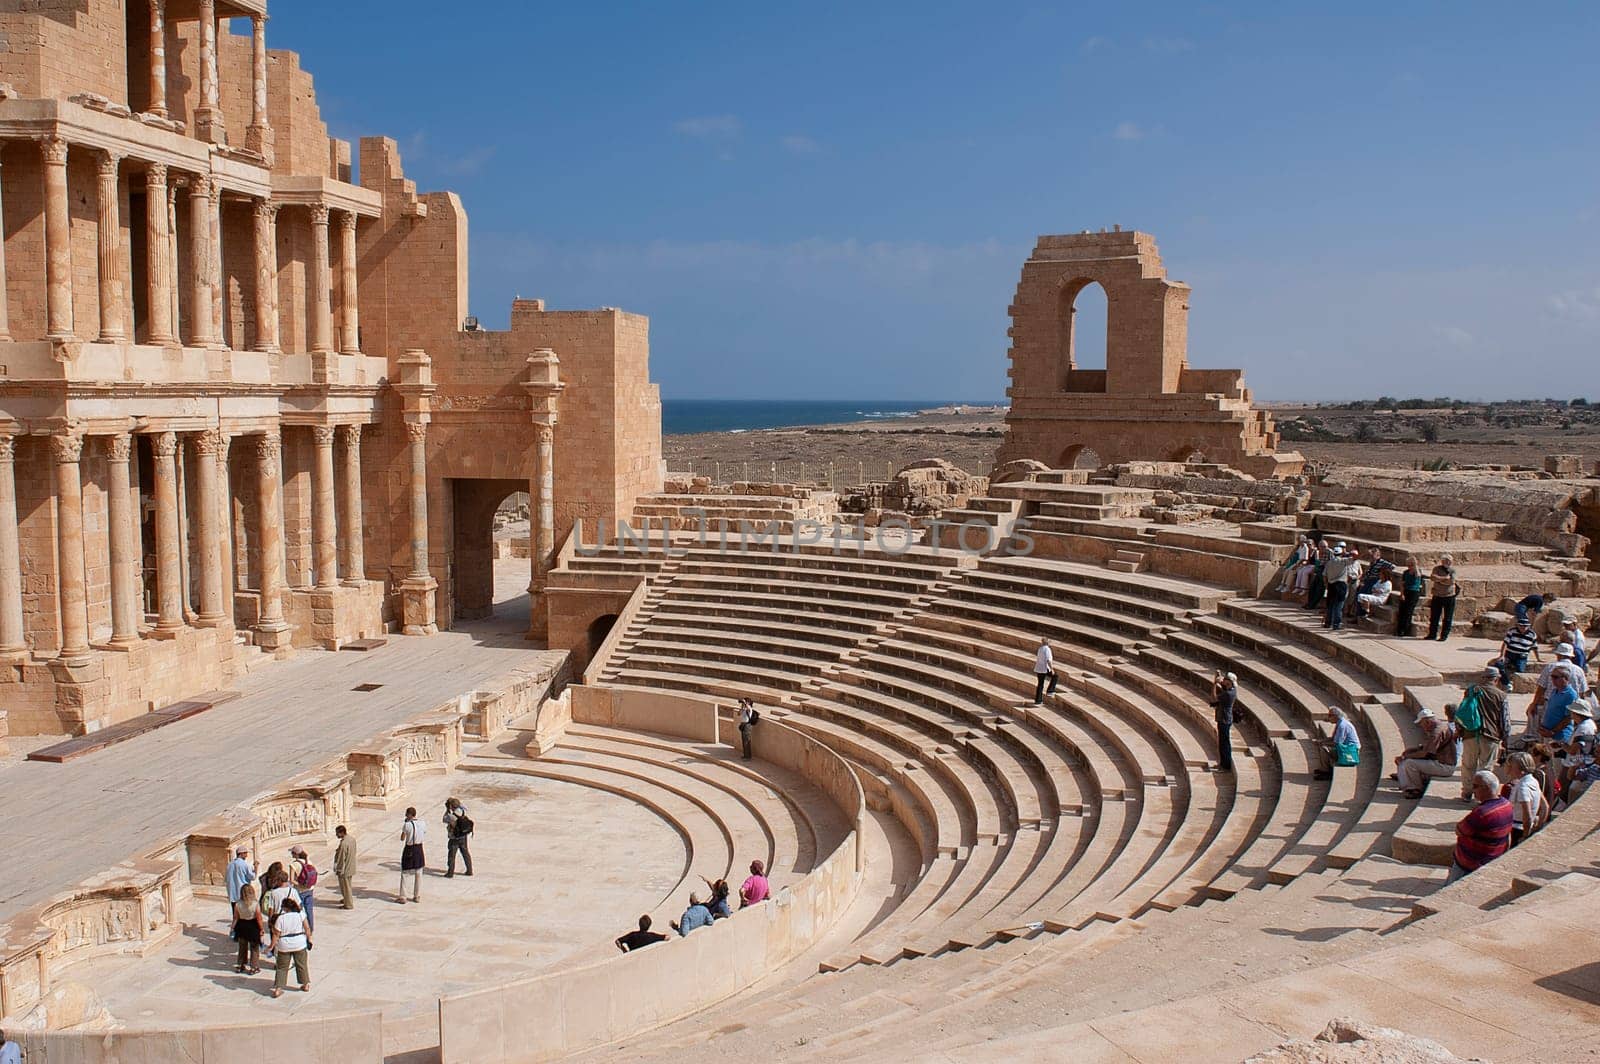 Archaeological Site of Sabratha, Libya - 10/31/2006:  Tourists at the Theatre of the ancient Phoenician city of Sabratha